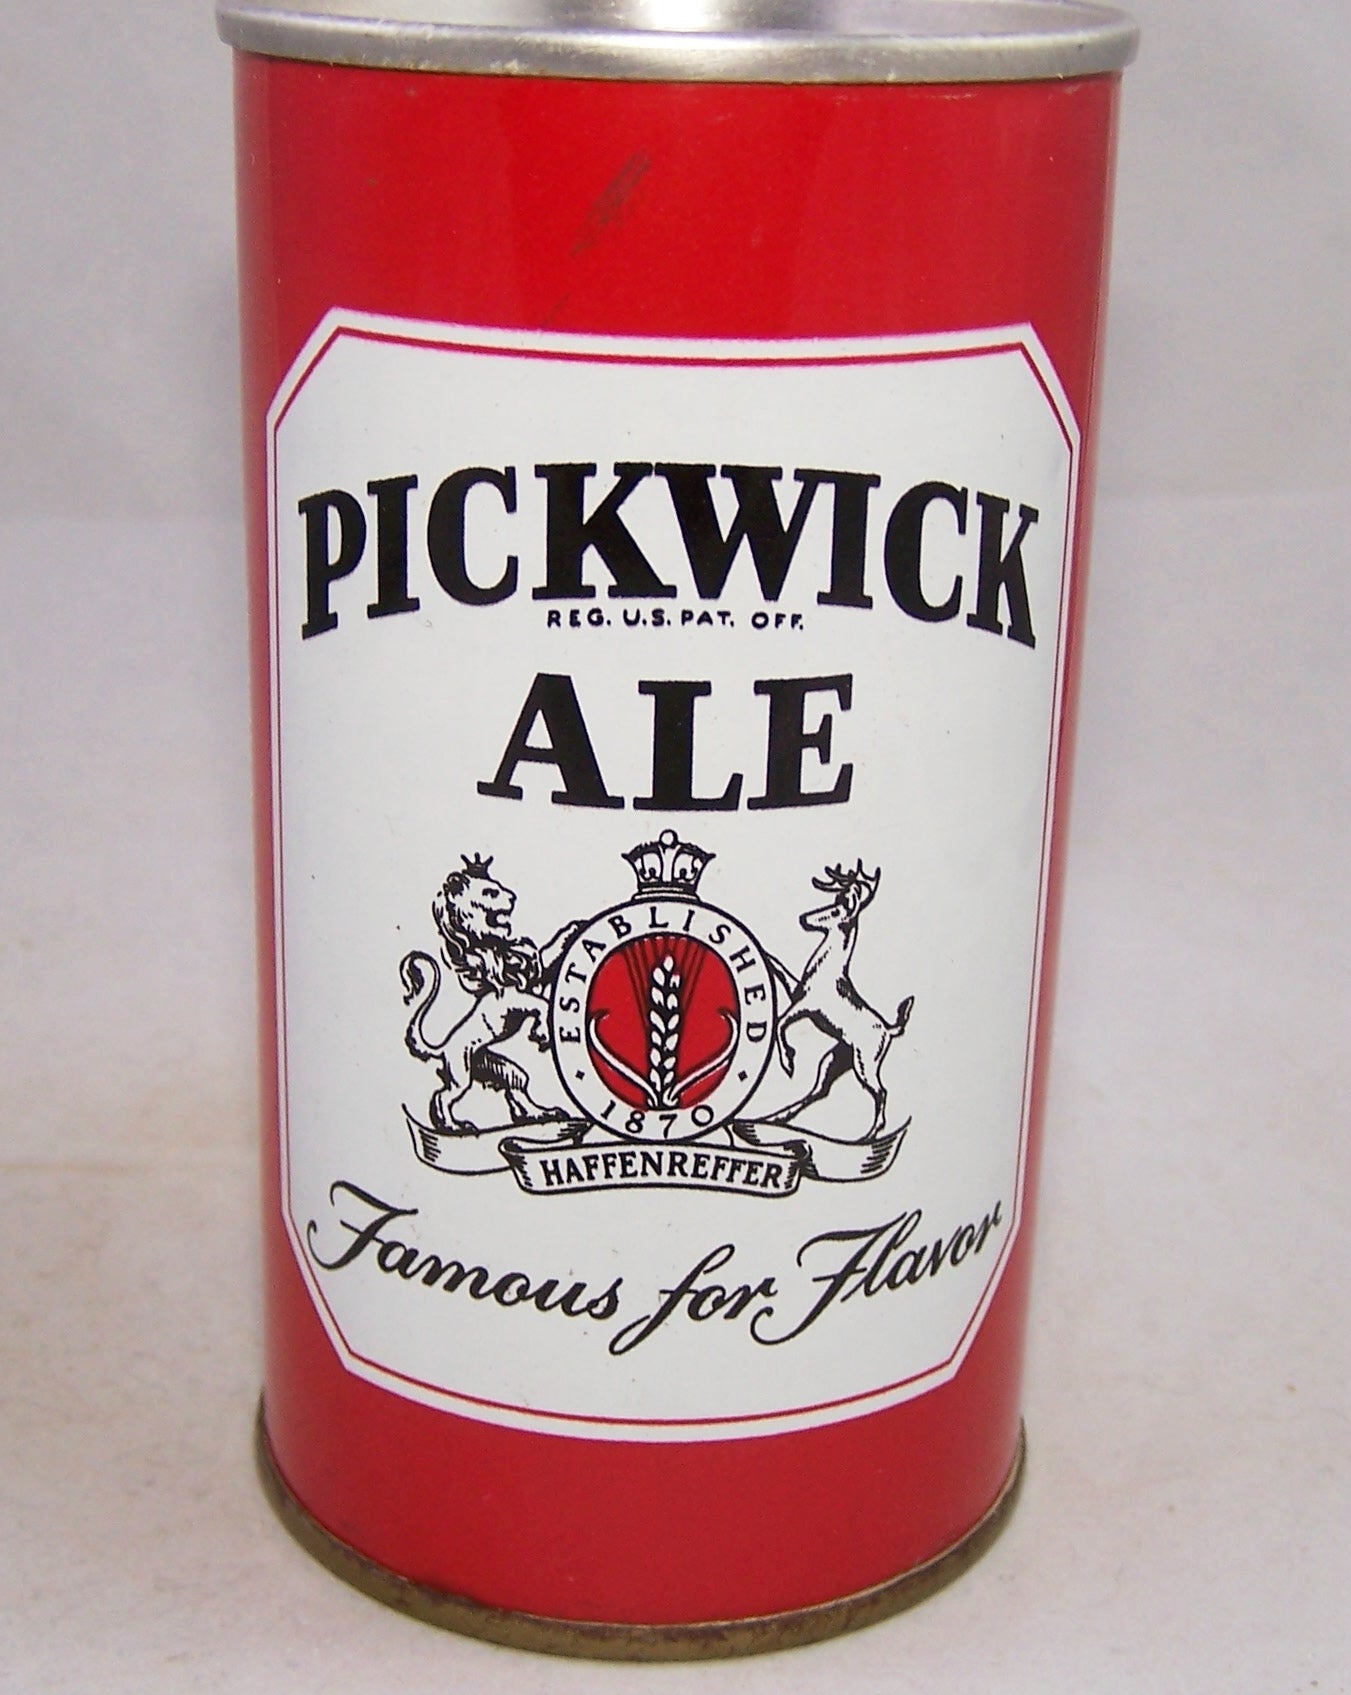 Pickwick Ale "Famous for Flavor" USBC II 108-34. Grade 1/1+